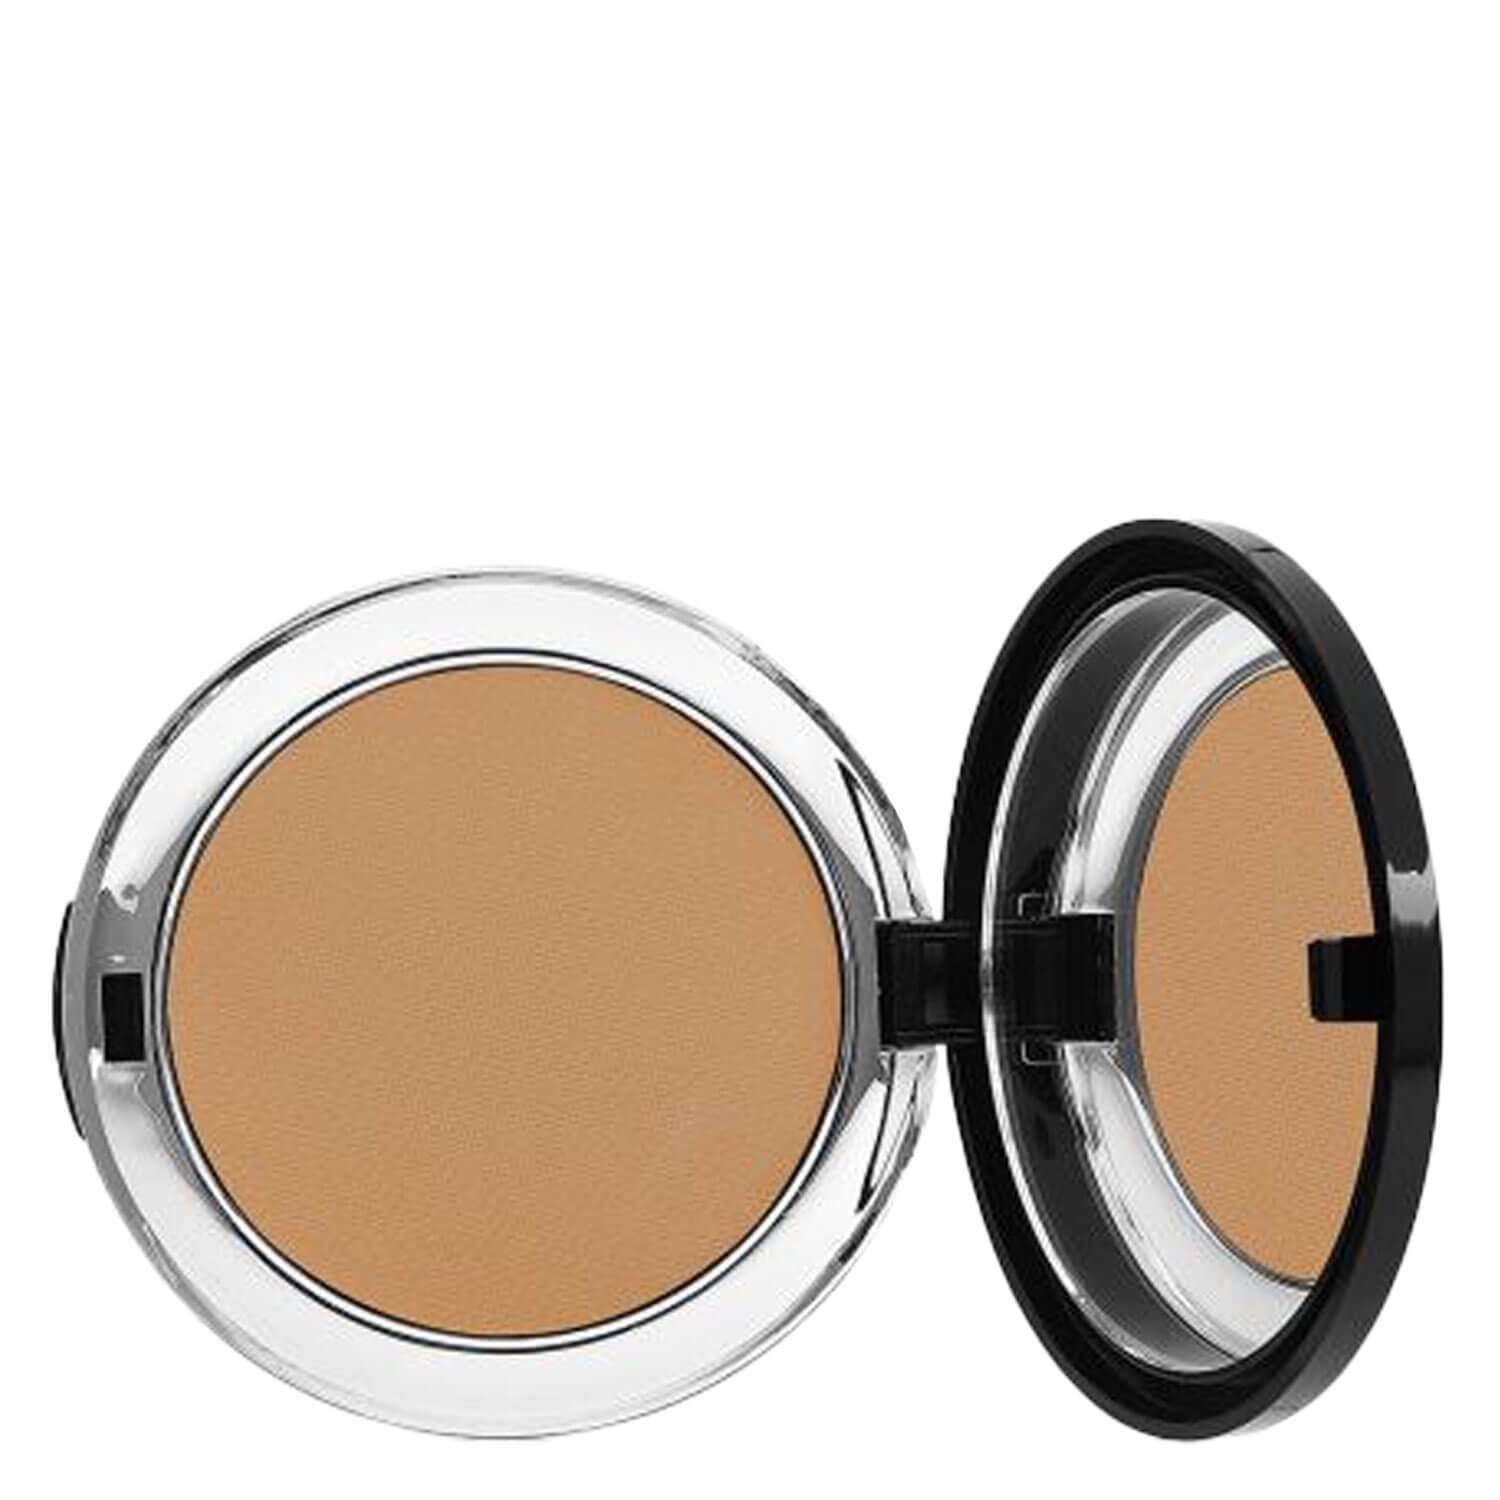 Product image from bellapierre Teint - Compact Mineral Foundation SPF15 Cafe